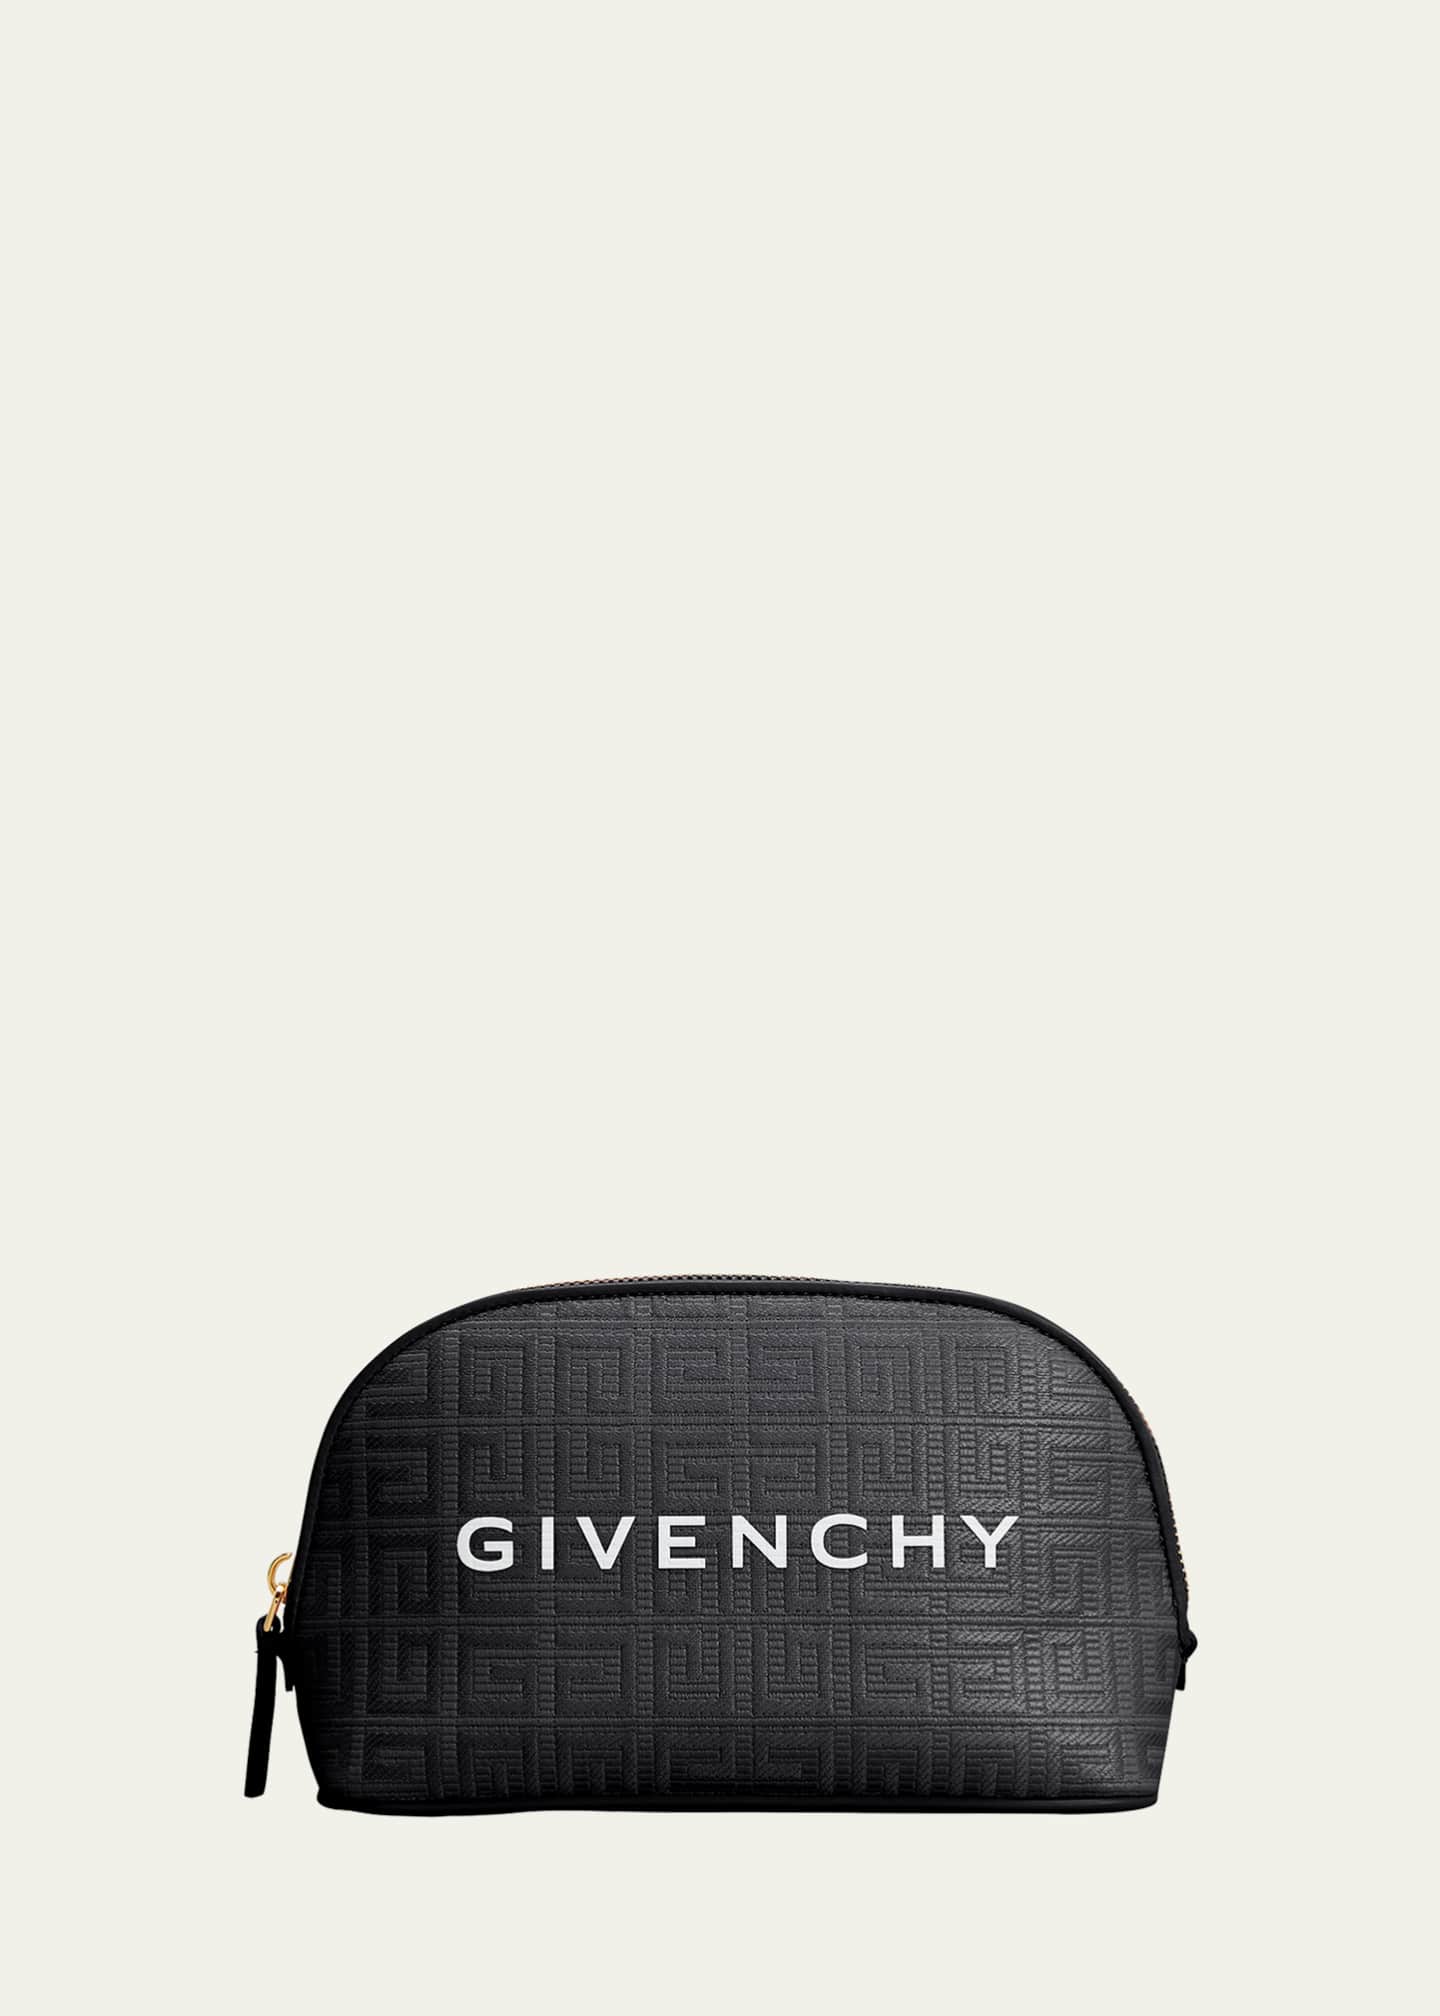 Givenchy G Essential Pouch Cosmetic Bag - Bergdorf Goodman